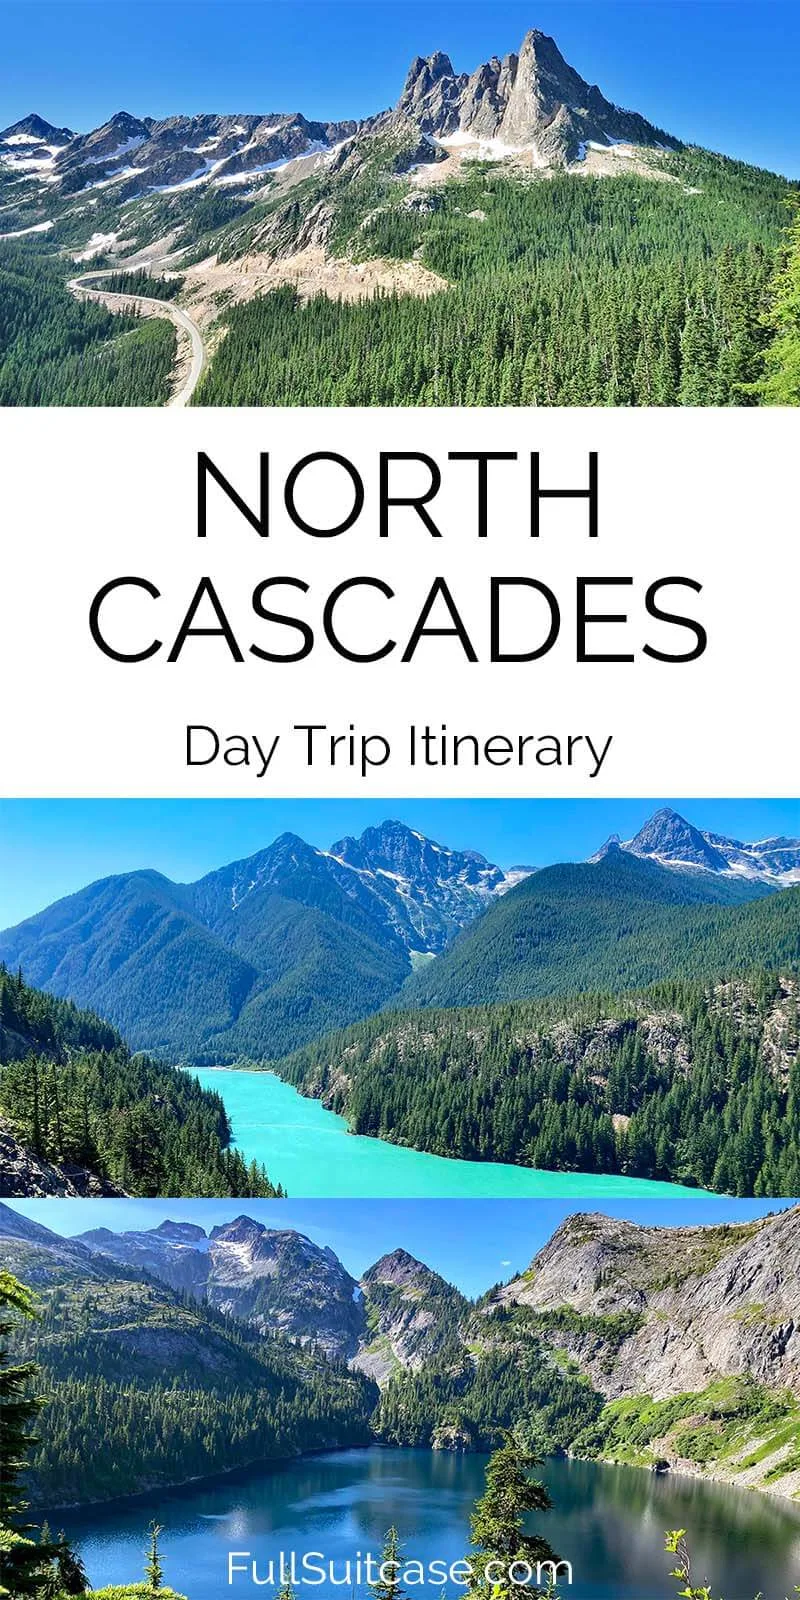 North Cascades day trip itinerary from Seattle